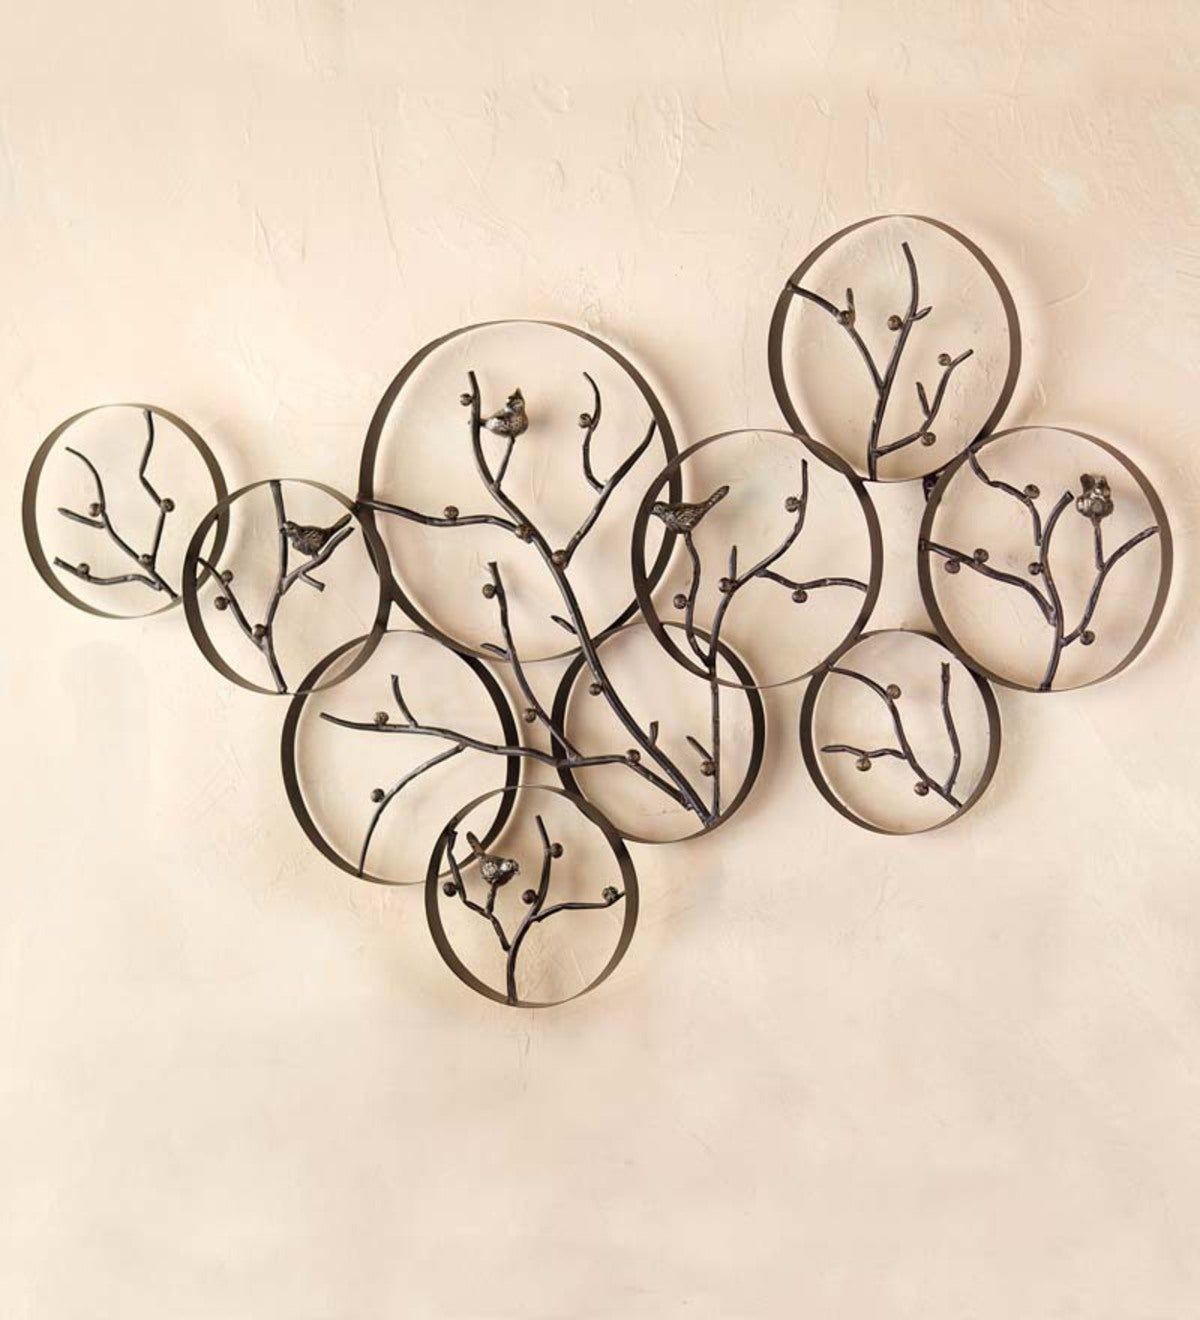 Metal Bird And Branch Wall Art | Plowhearth Within Recent Metal Bird Wall Art (Gallery 15 of 20)